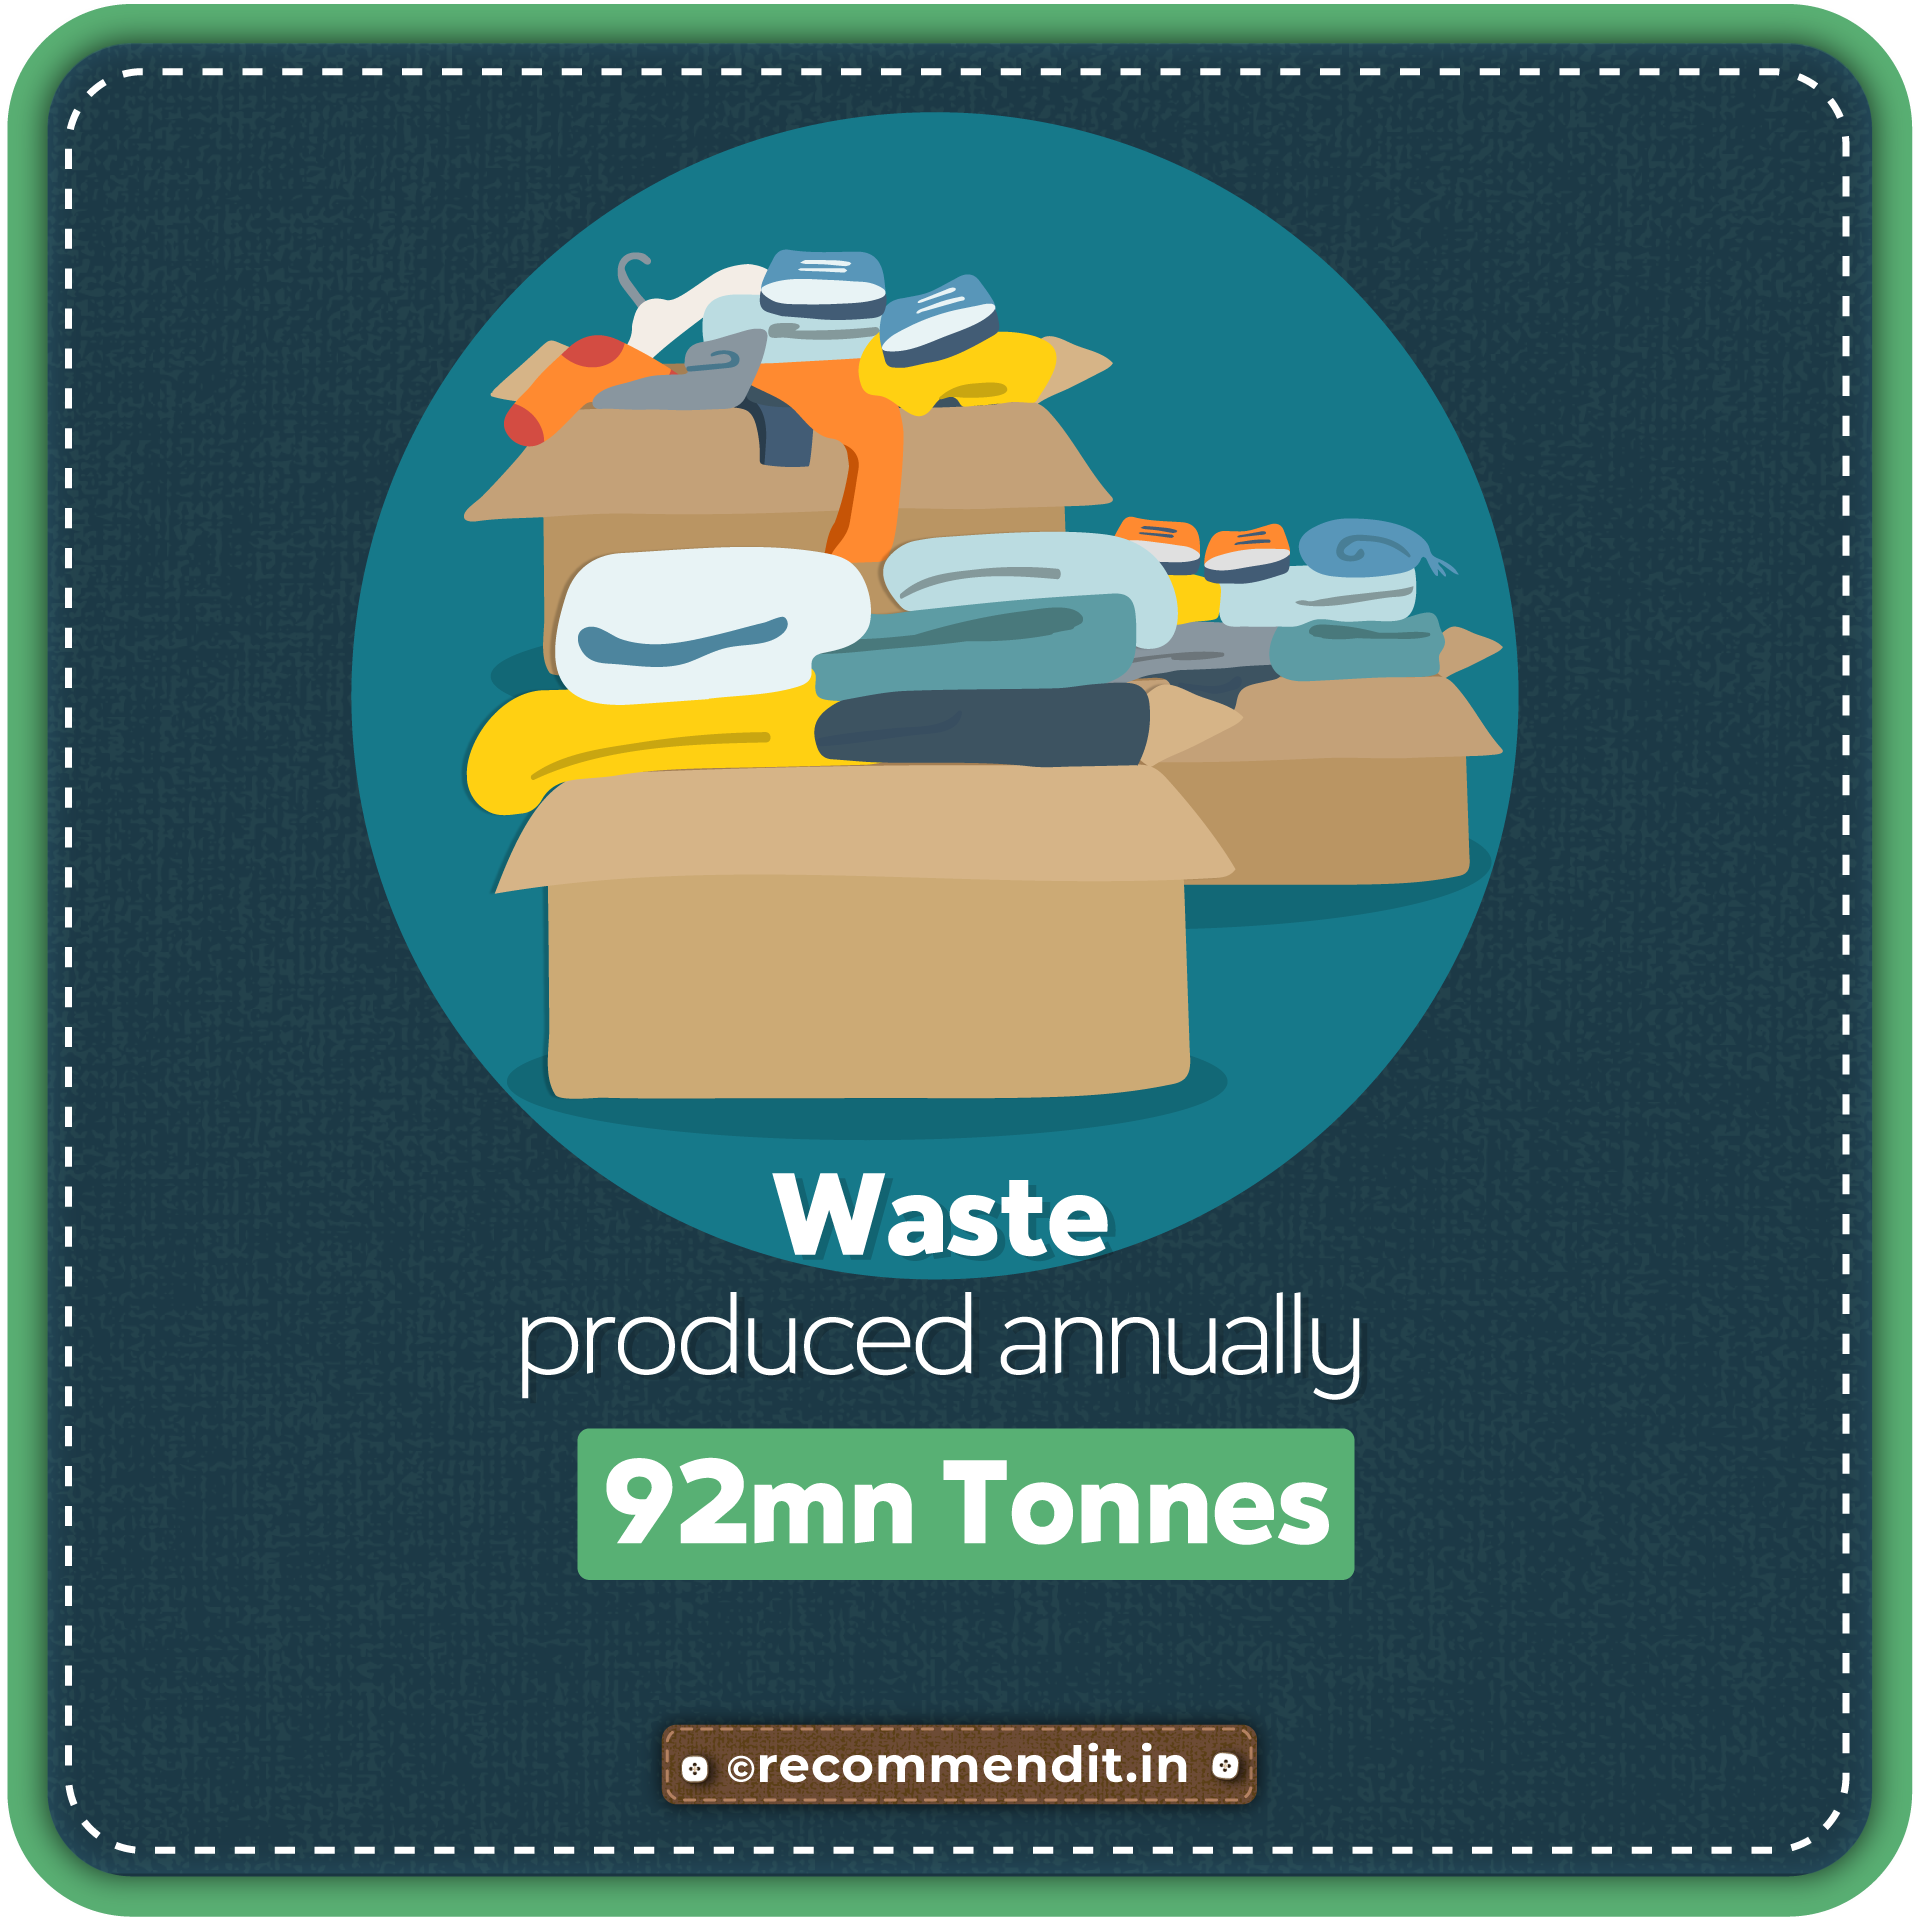 Waste produced annually